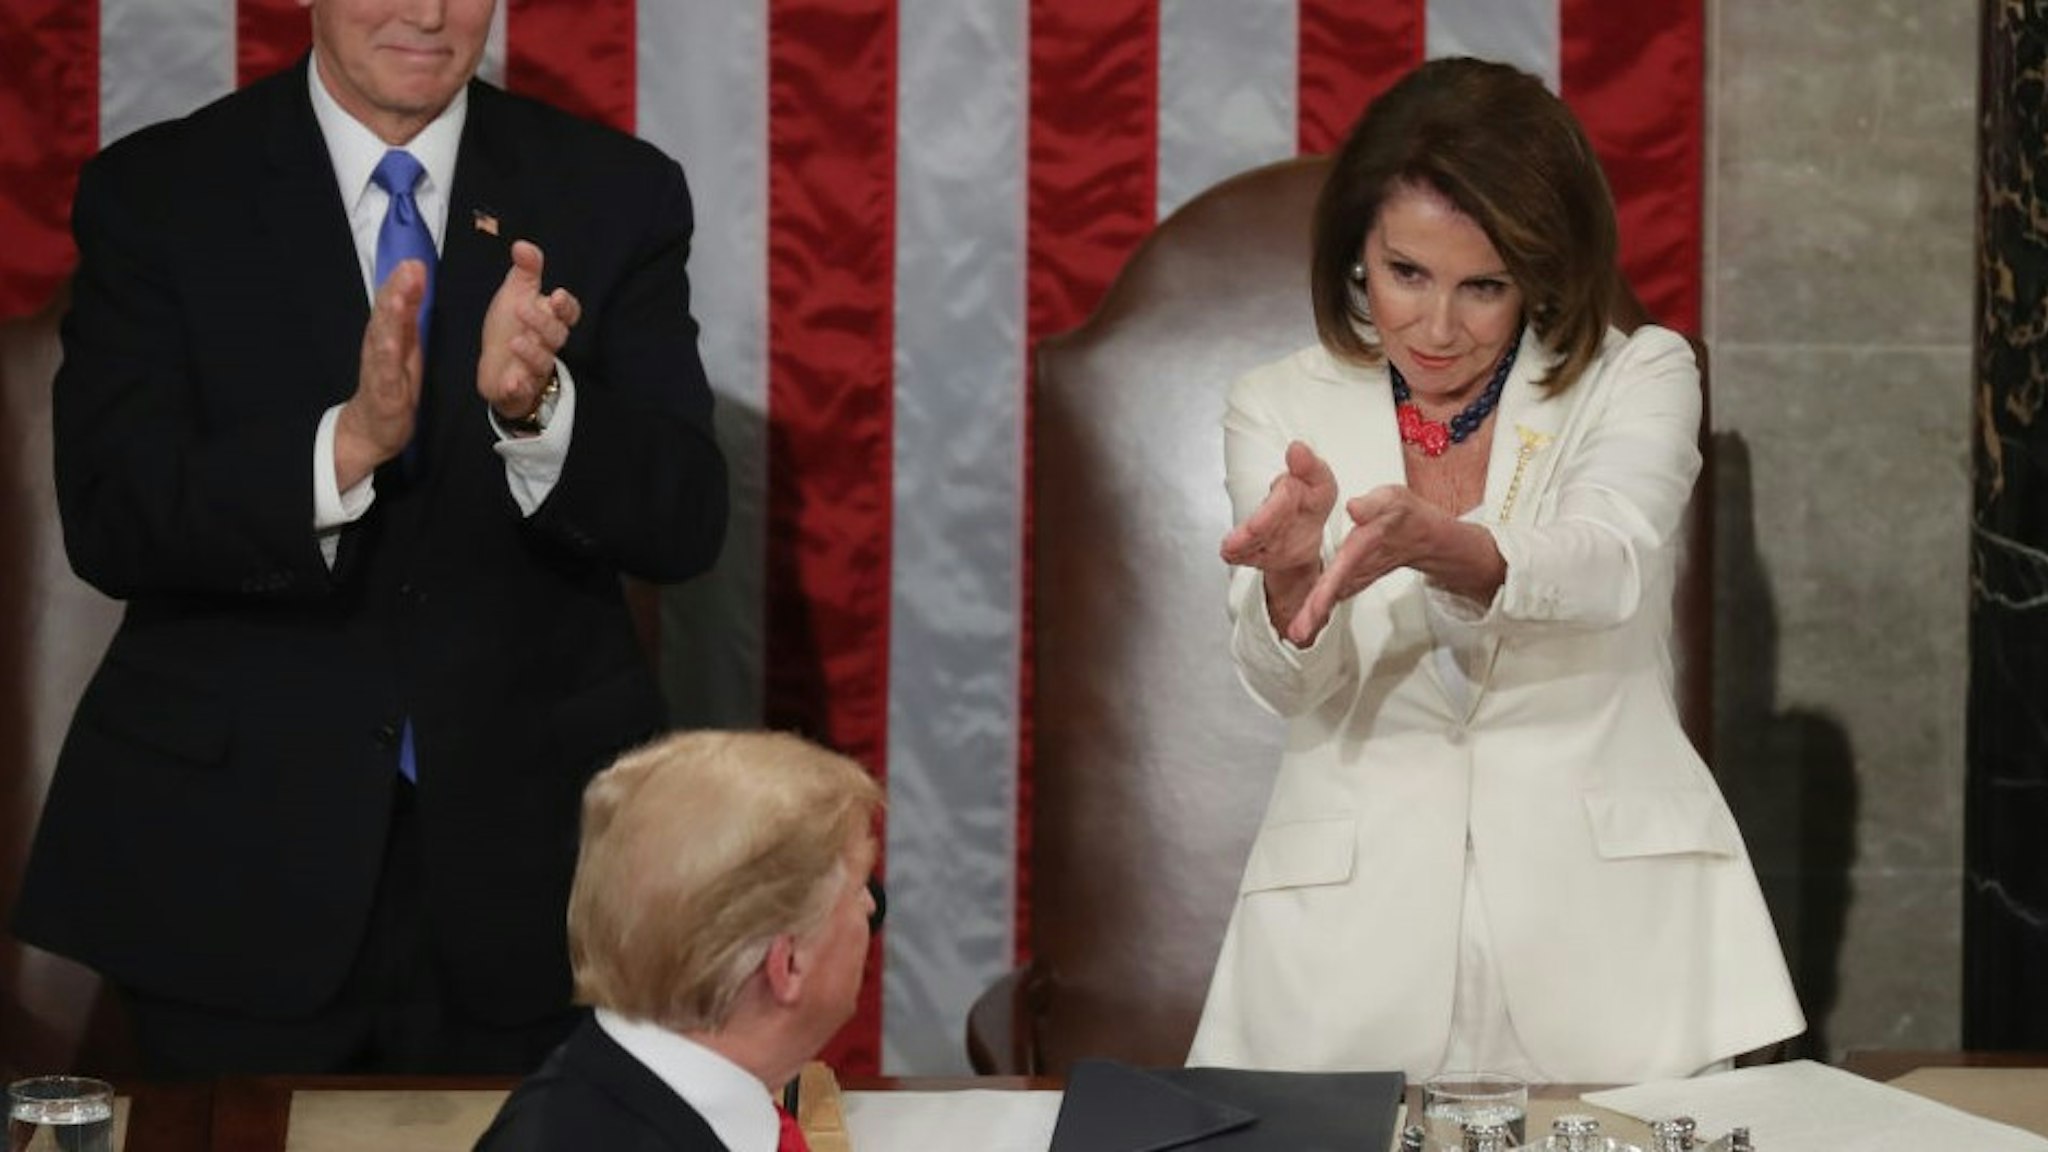 WASHINGTON, DC - FEBRUARY 05: Vice President Mike Pence and Speaker Nancy Pelosi greet President Donald Trump just ahead of the State of the Union address in the chamber of the U.S. House of Representatives at the U.S. Capitol Building on February 5, 2019 in Washington, DC. President Trump's second State of the Union address was postponed one week due to the partial government shutdown. (Photo by